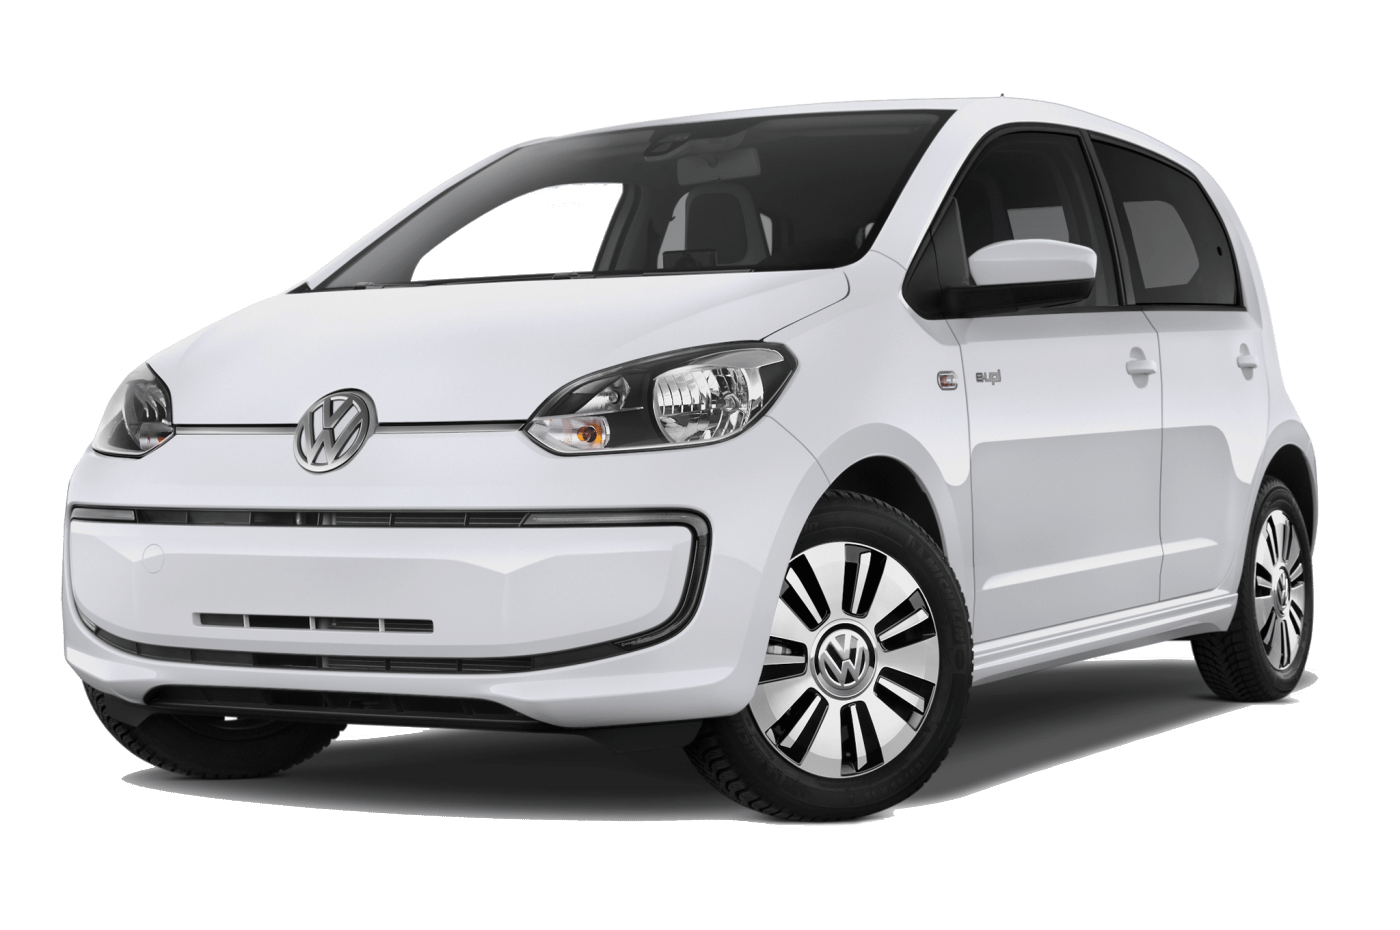 VW UP AUTOMATIC 1.0 - POX 7509